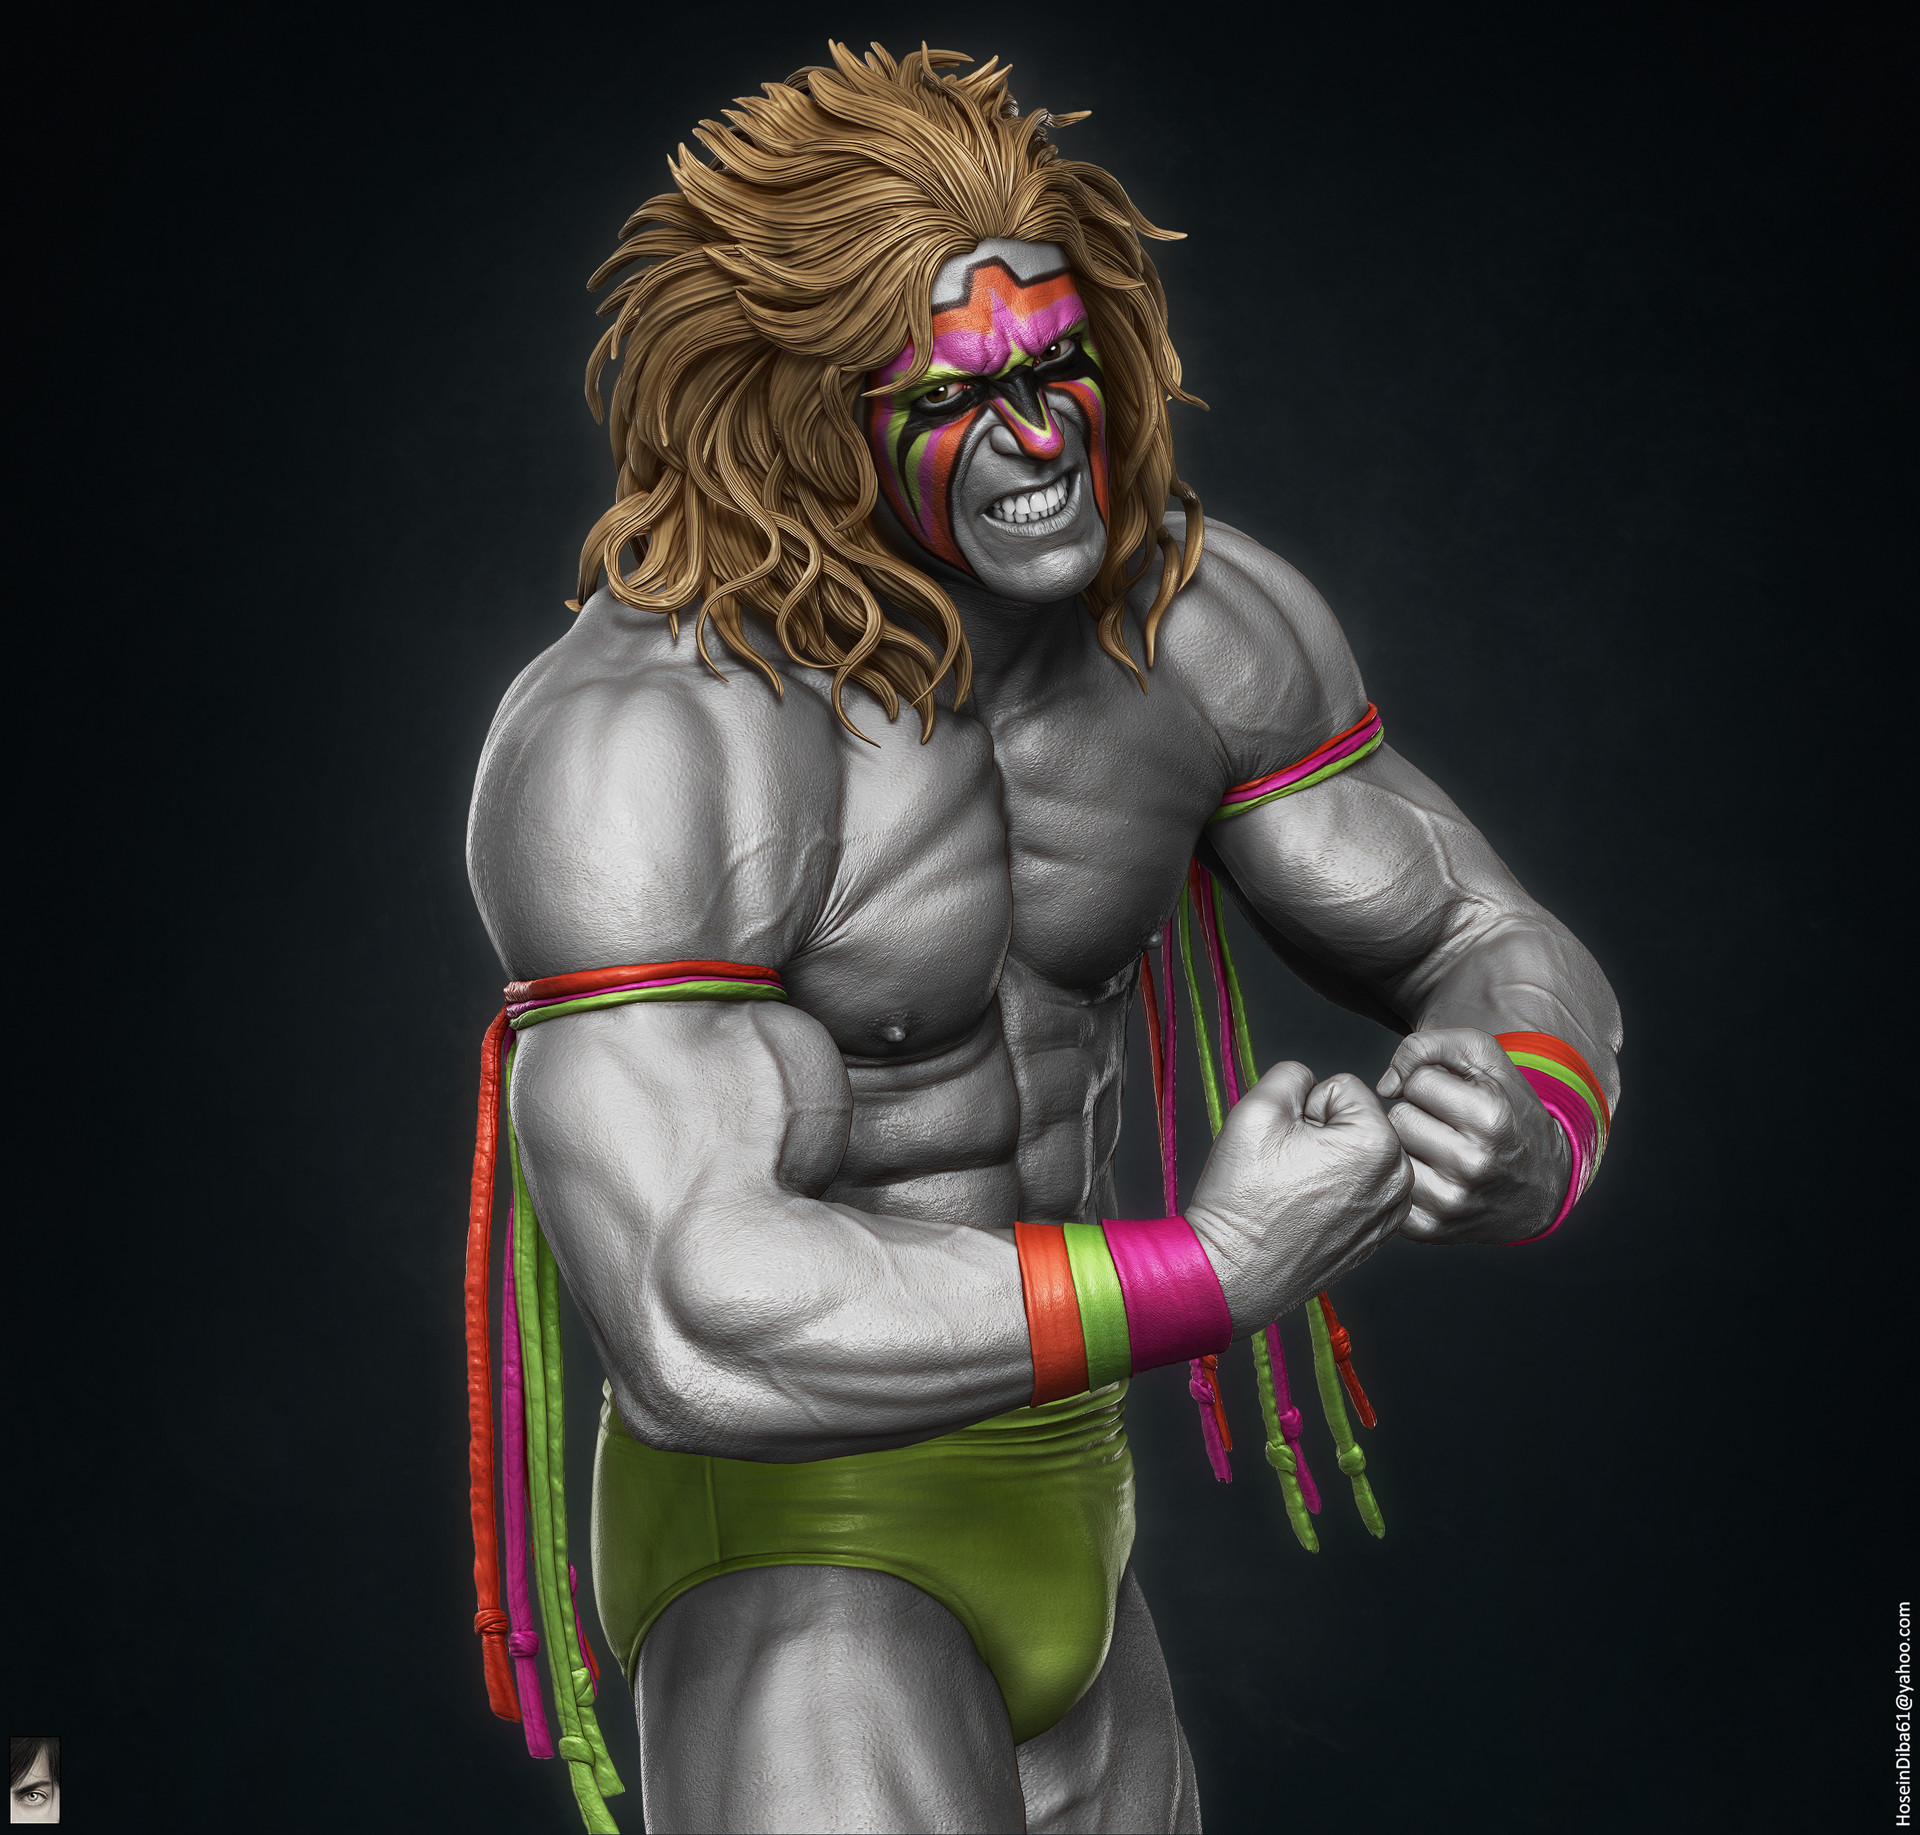 ultimate warrior drawing